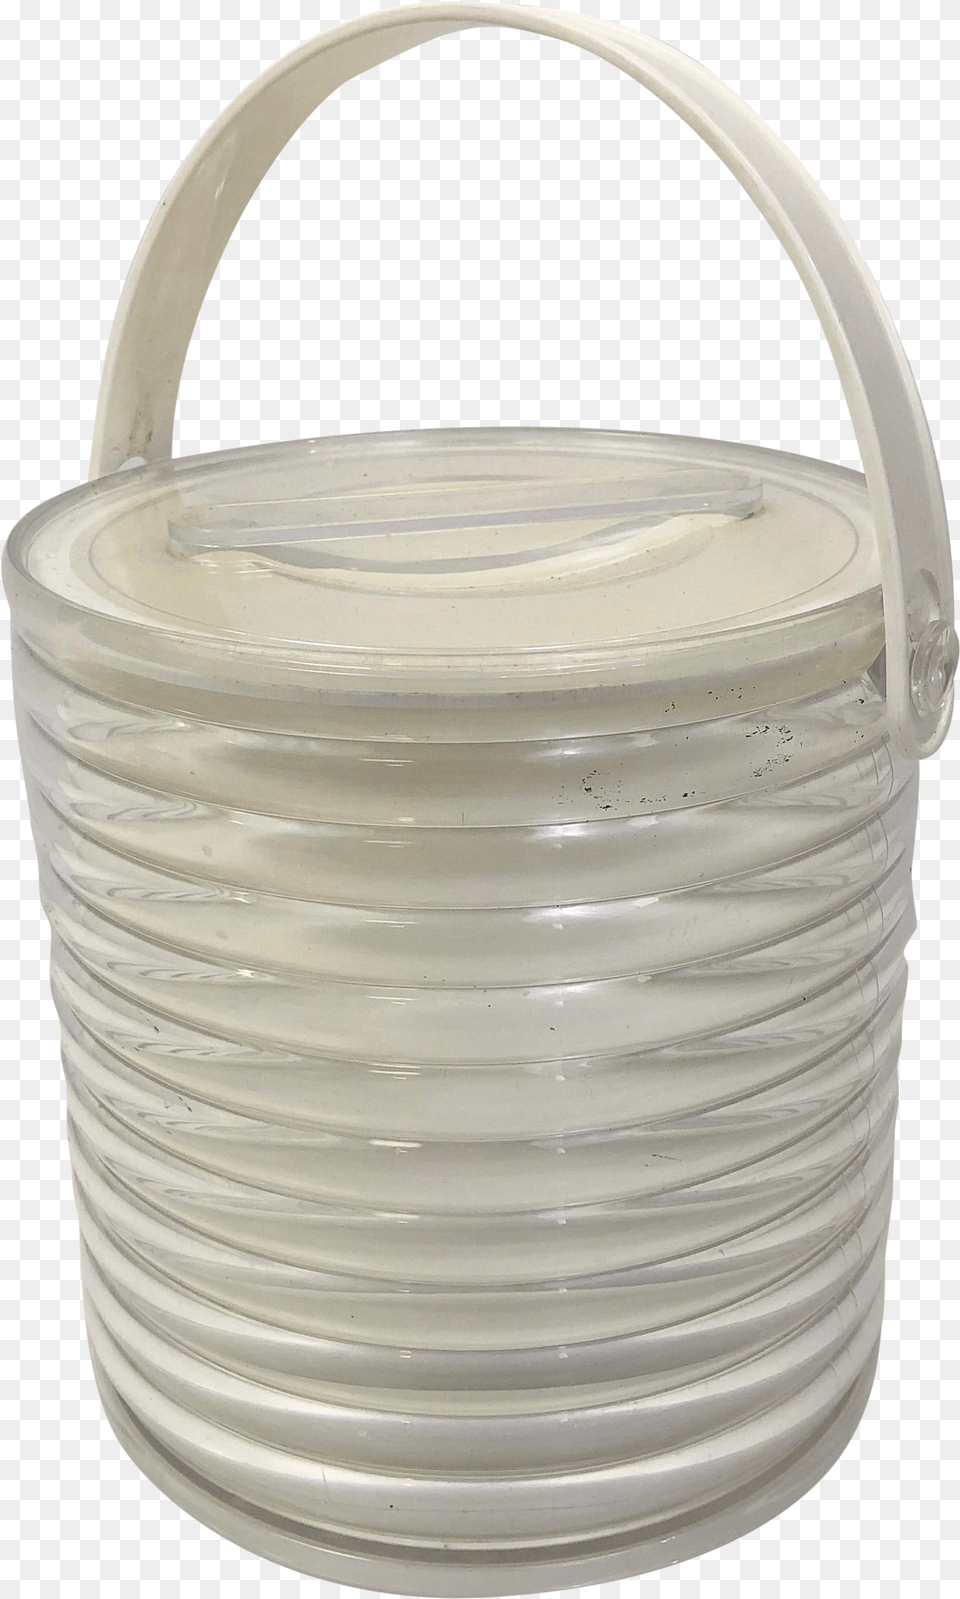 Vintage Lucite White Ice Bucket Lid Png